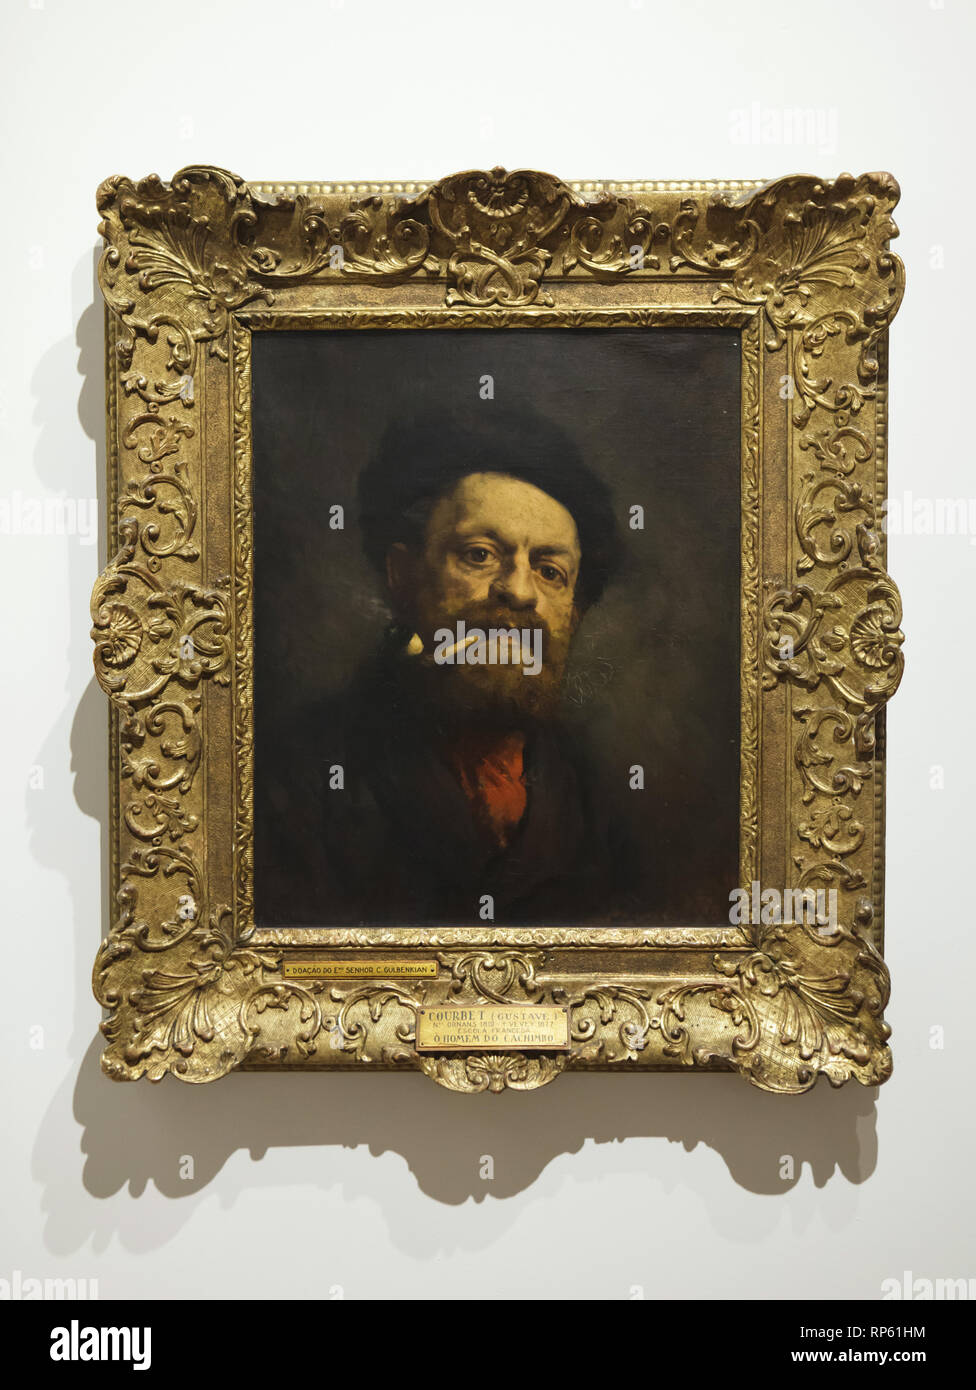 Painting 'Man with Pipe' by French realist painter Gustave Courbet (1868) on display in the National Museum of Ancient Art (Museu Nacional de Arte Antiga) in Lisbon, Portugal. The painting was donated to the museum by British businessman and philanthropist Calouste Gulbenkian in 1950. Stock Photo